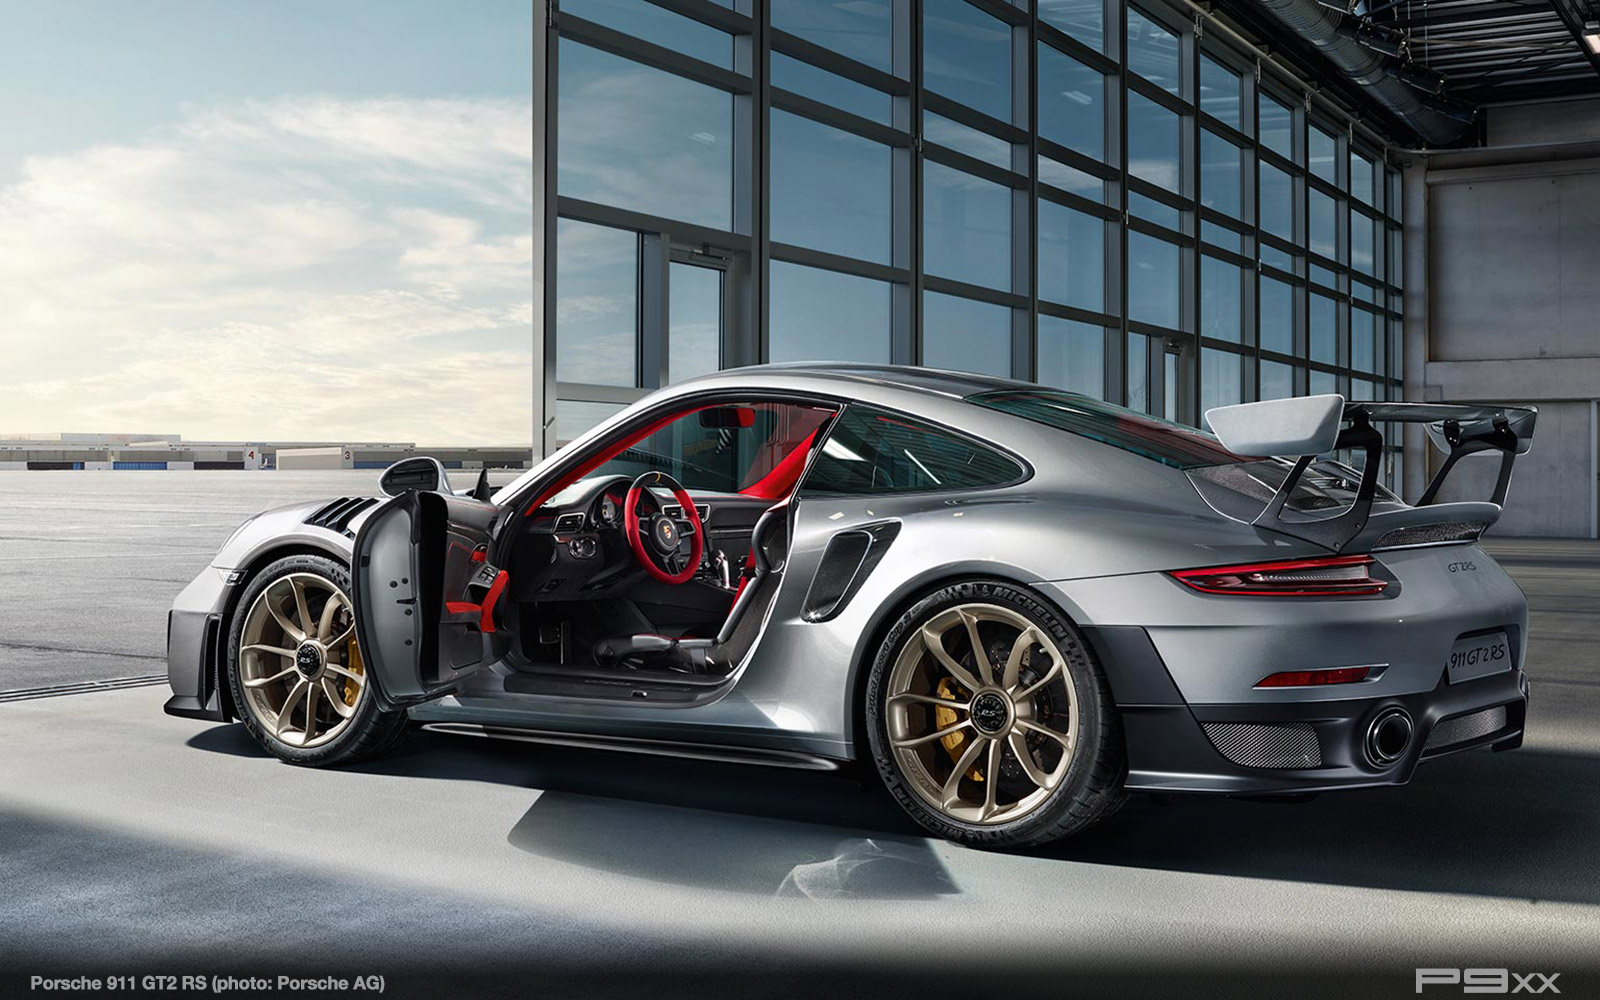 Say Hello To The New GT2 RS, Most Powerful Porsche 911 of 